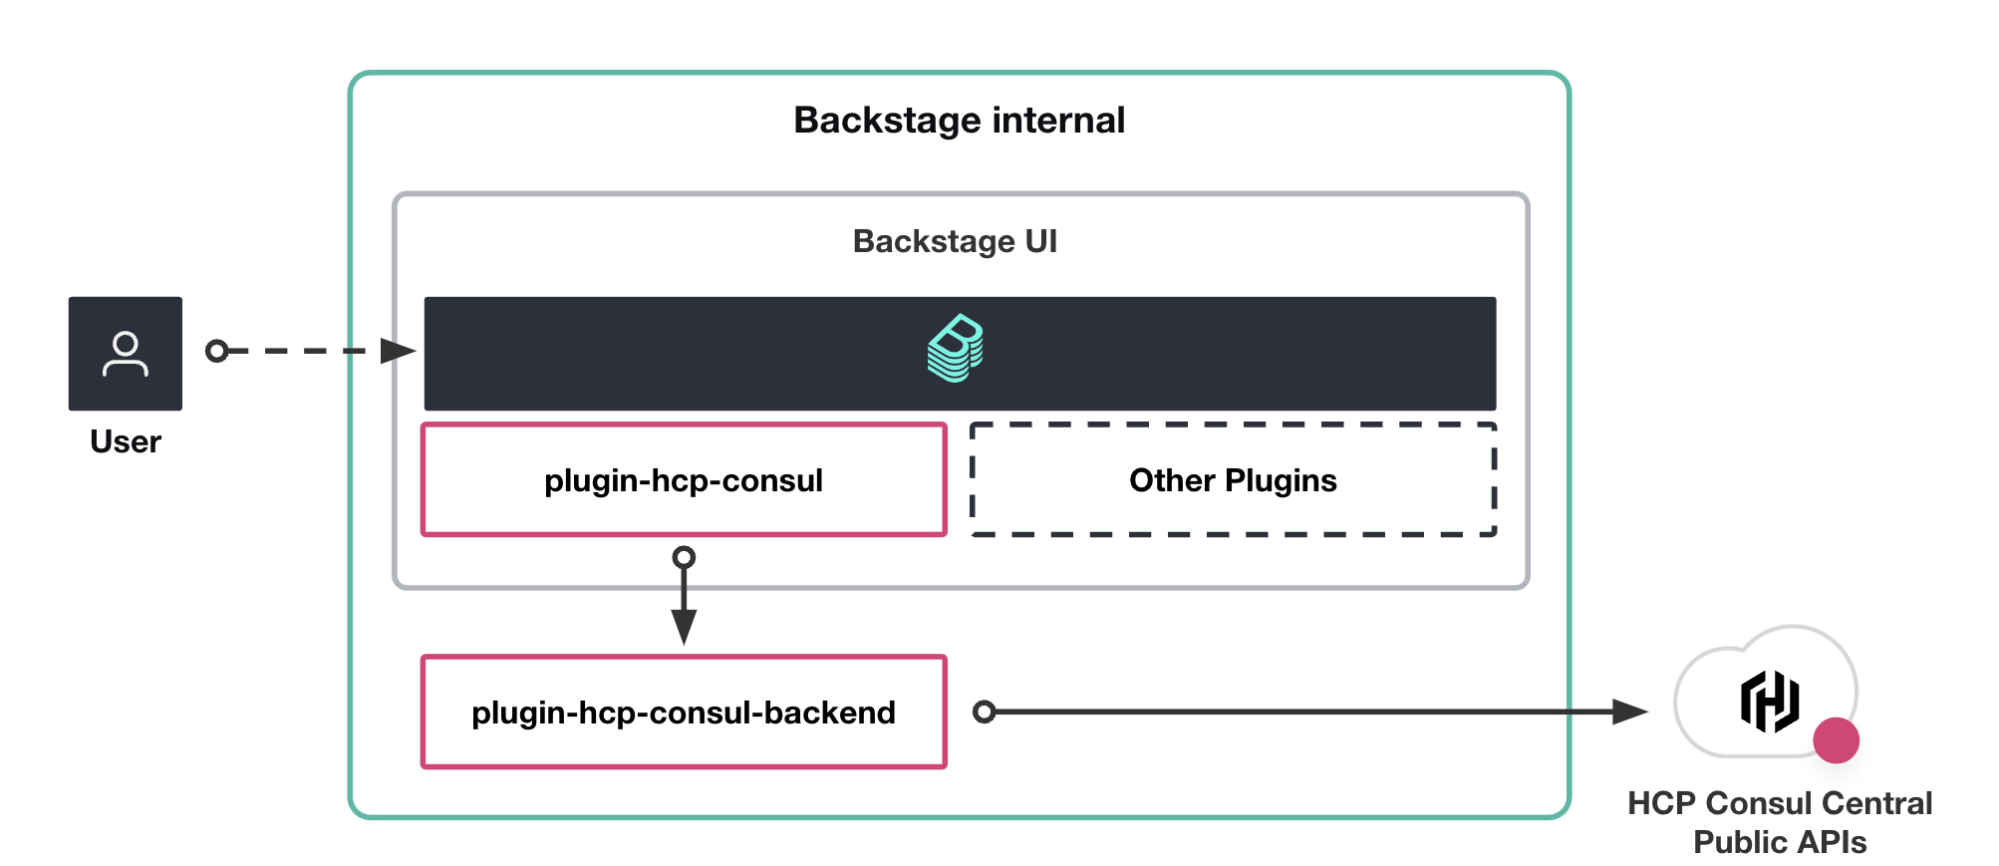 Workflow for the HCP Consul plugin